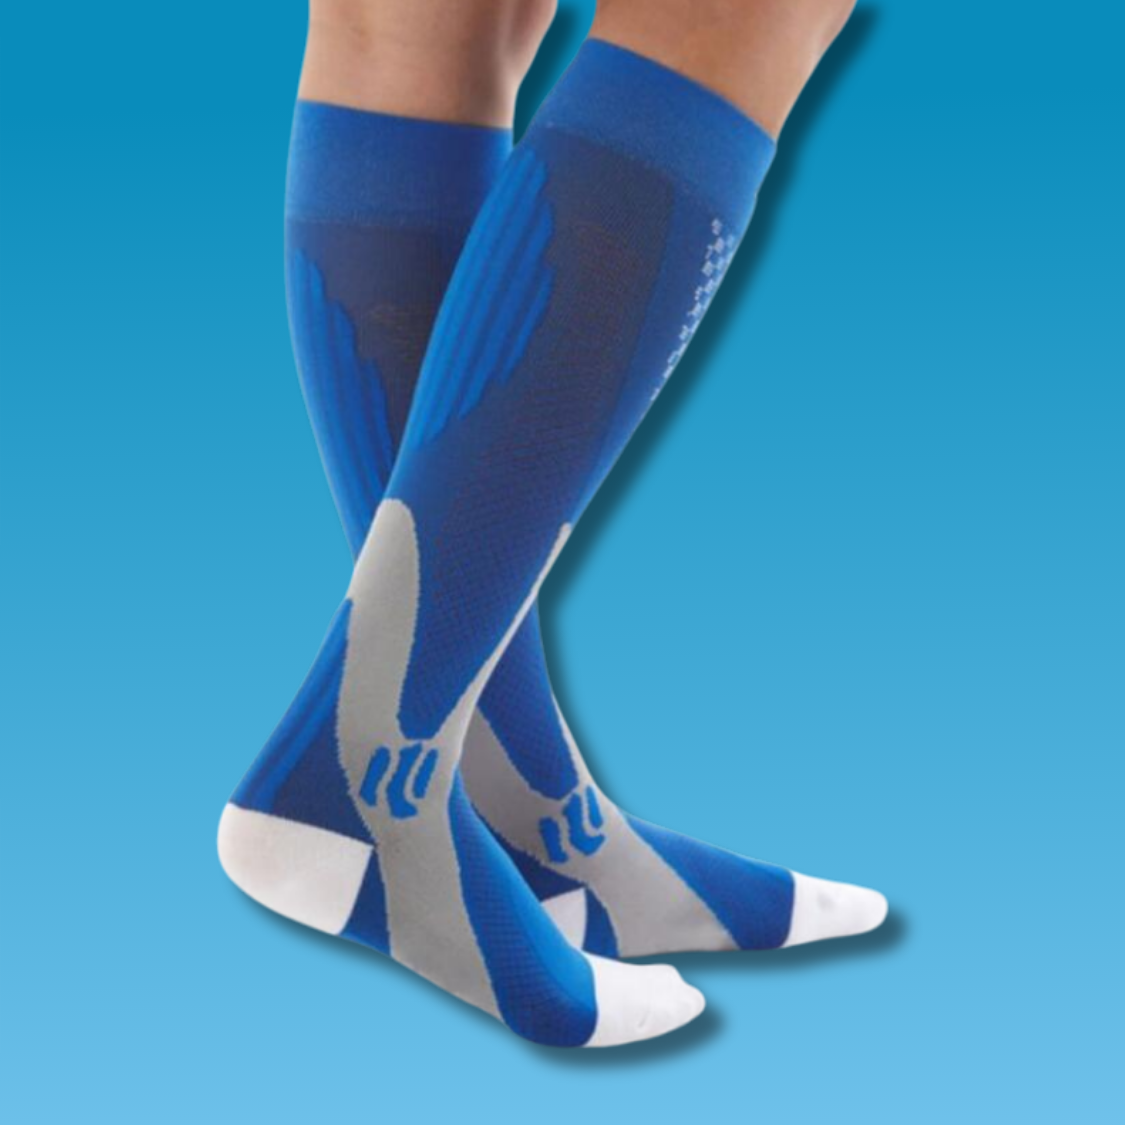 Mix & Match Bundle Compression Socks | Foot and Leg Pain Relief